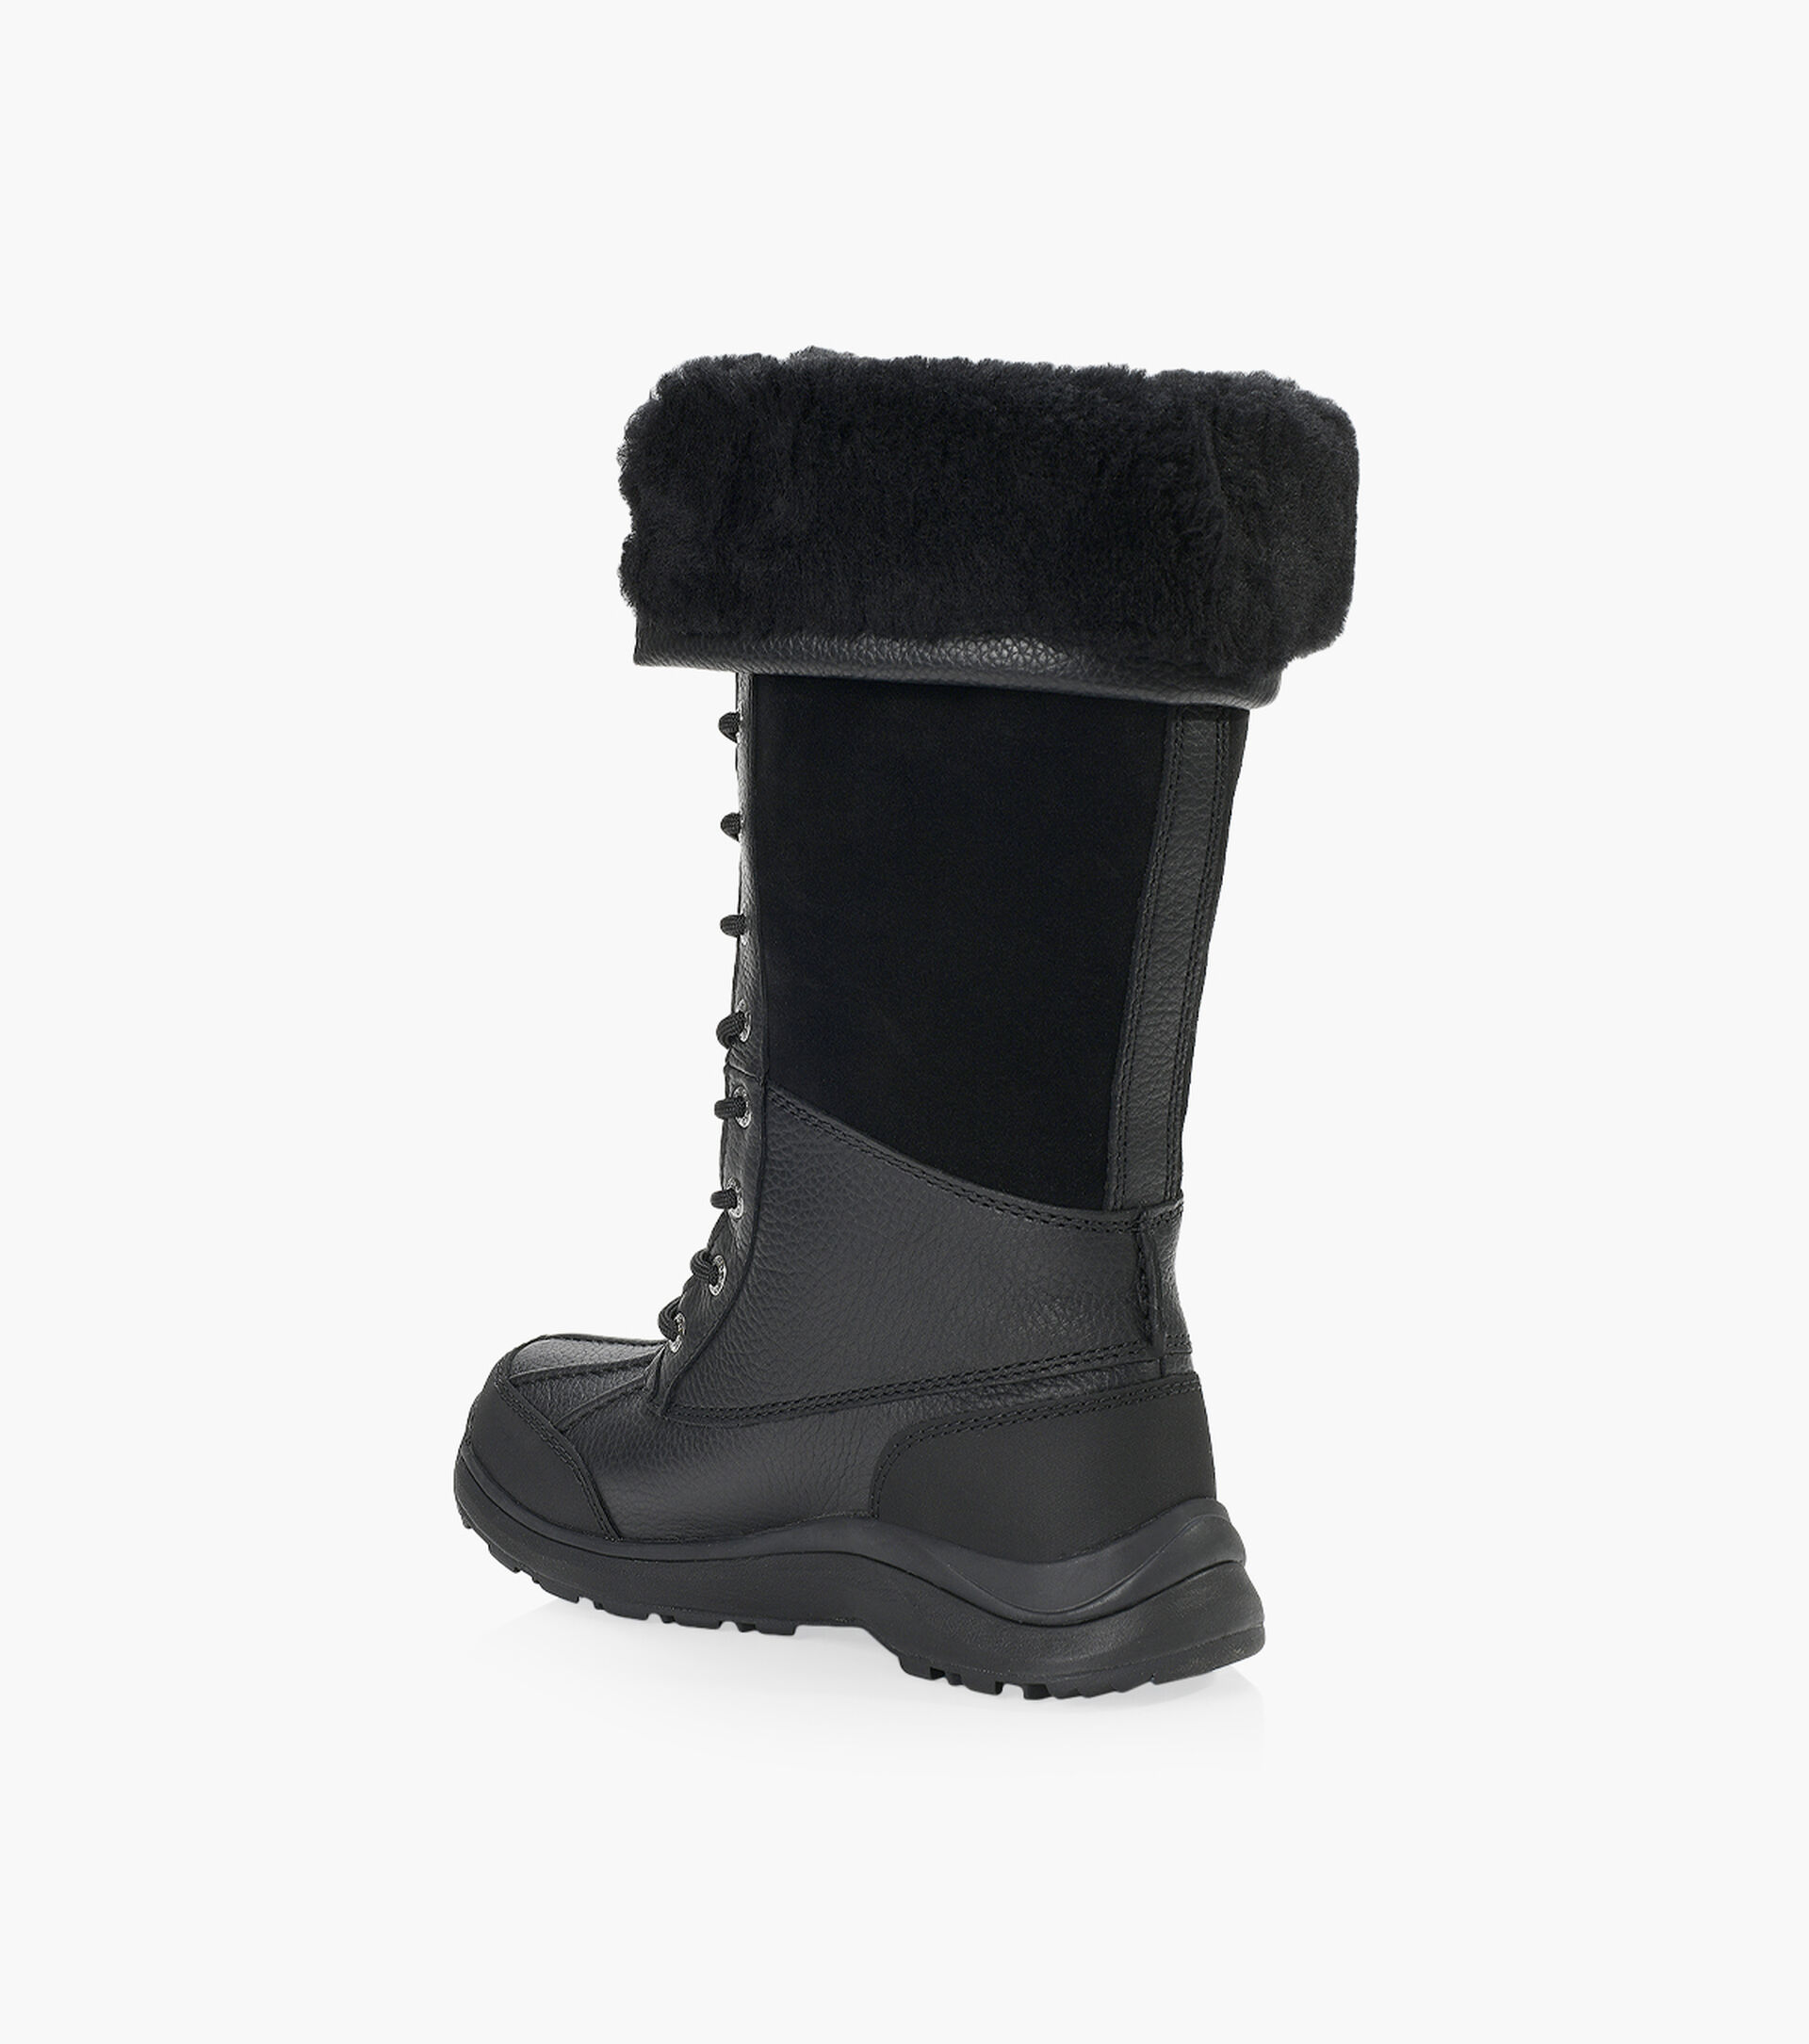 UGG ADIRONDACK III TALL BOOT - Black Leather | Browns Shoes